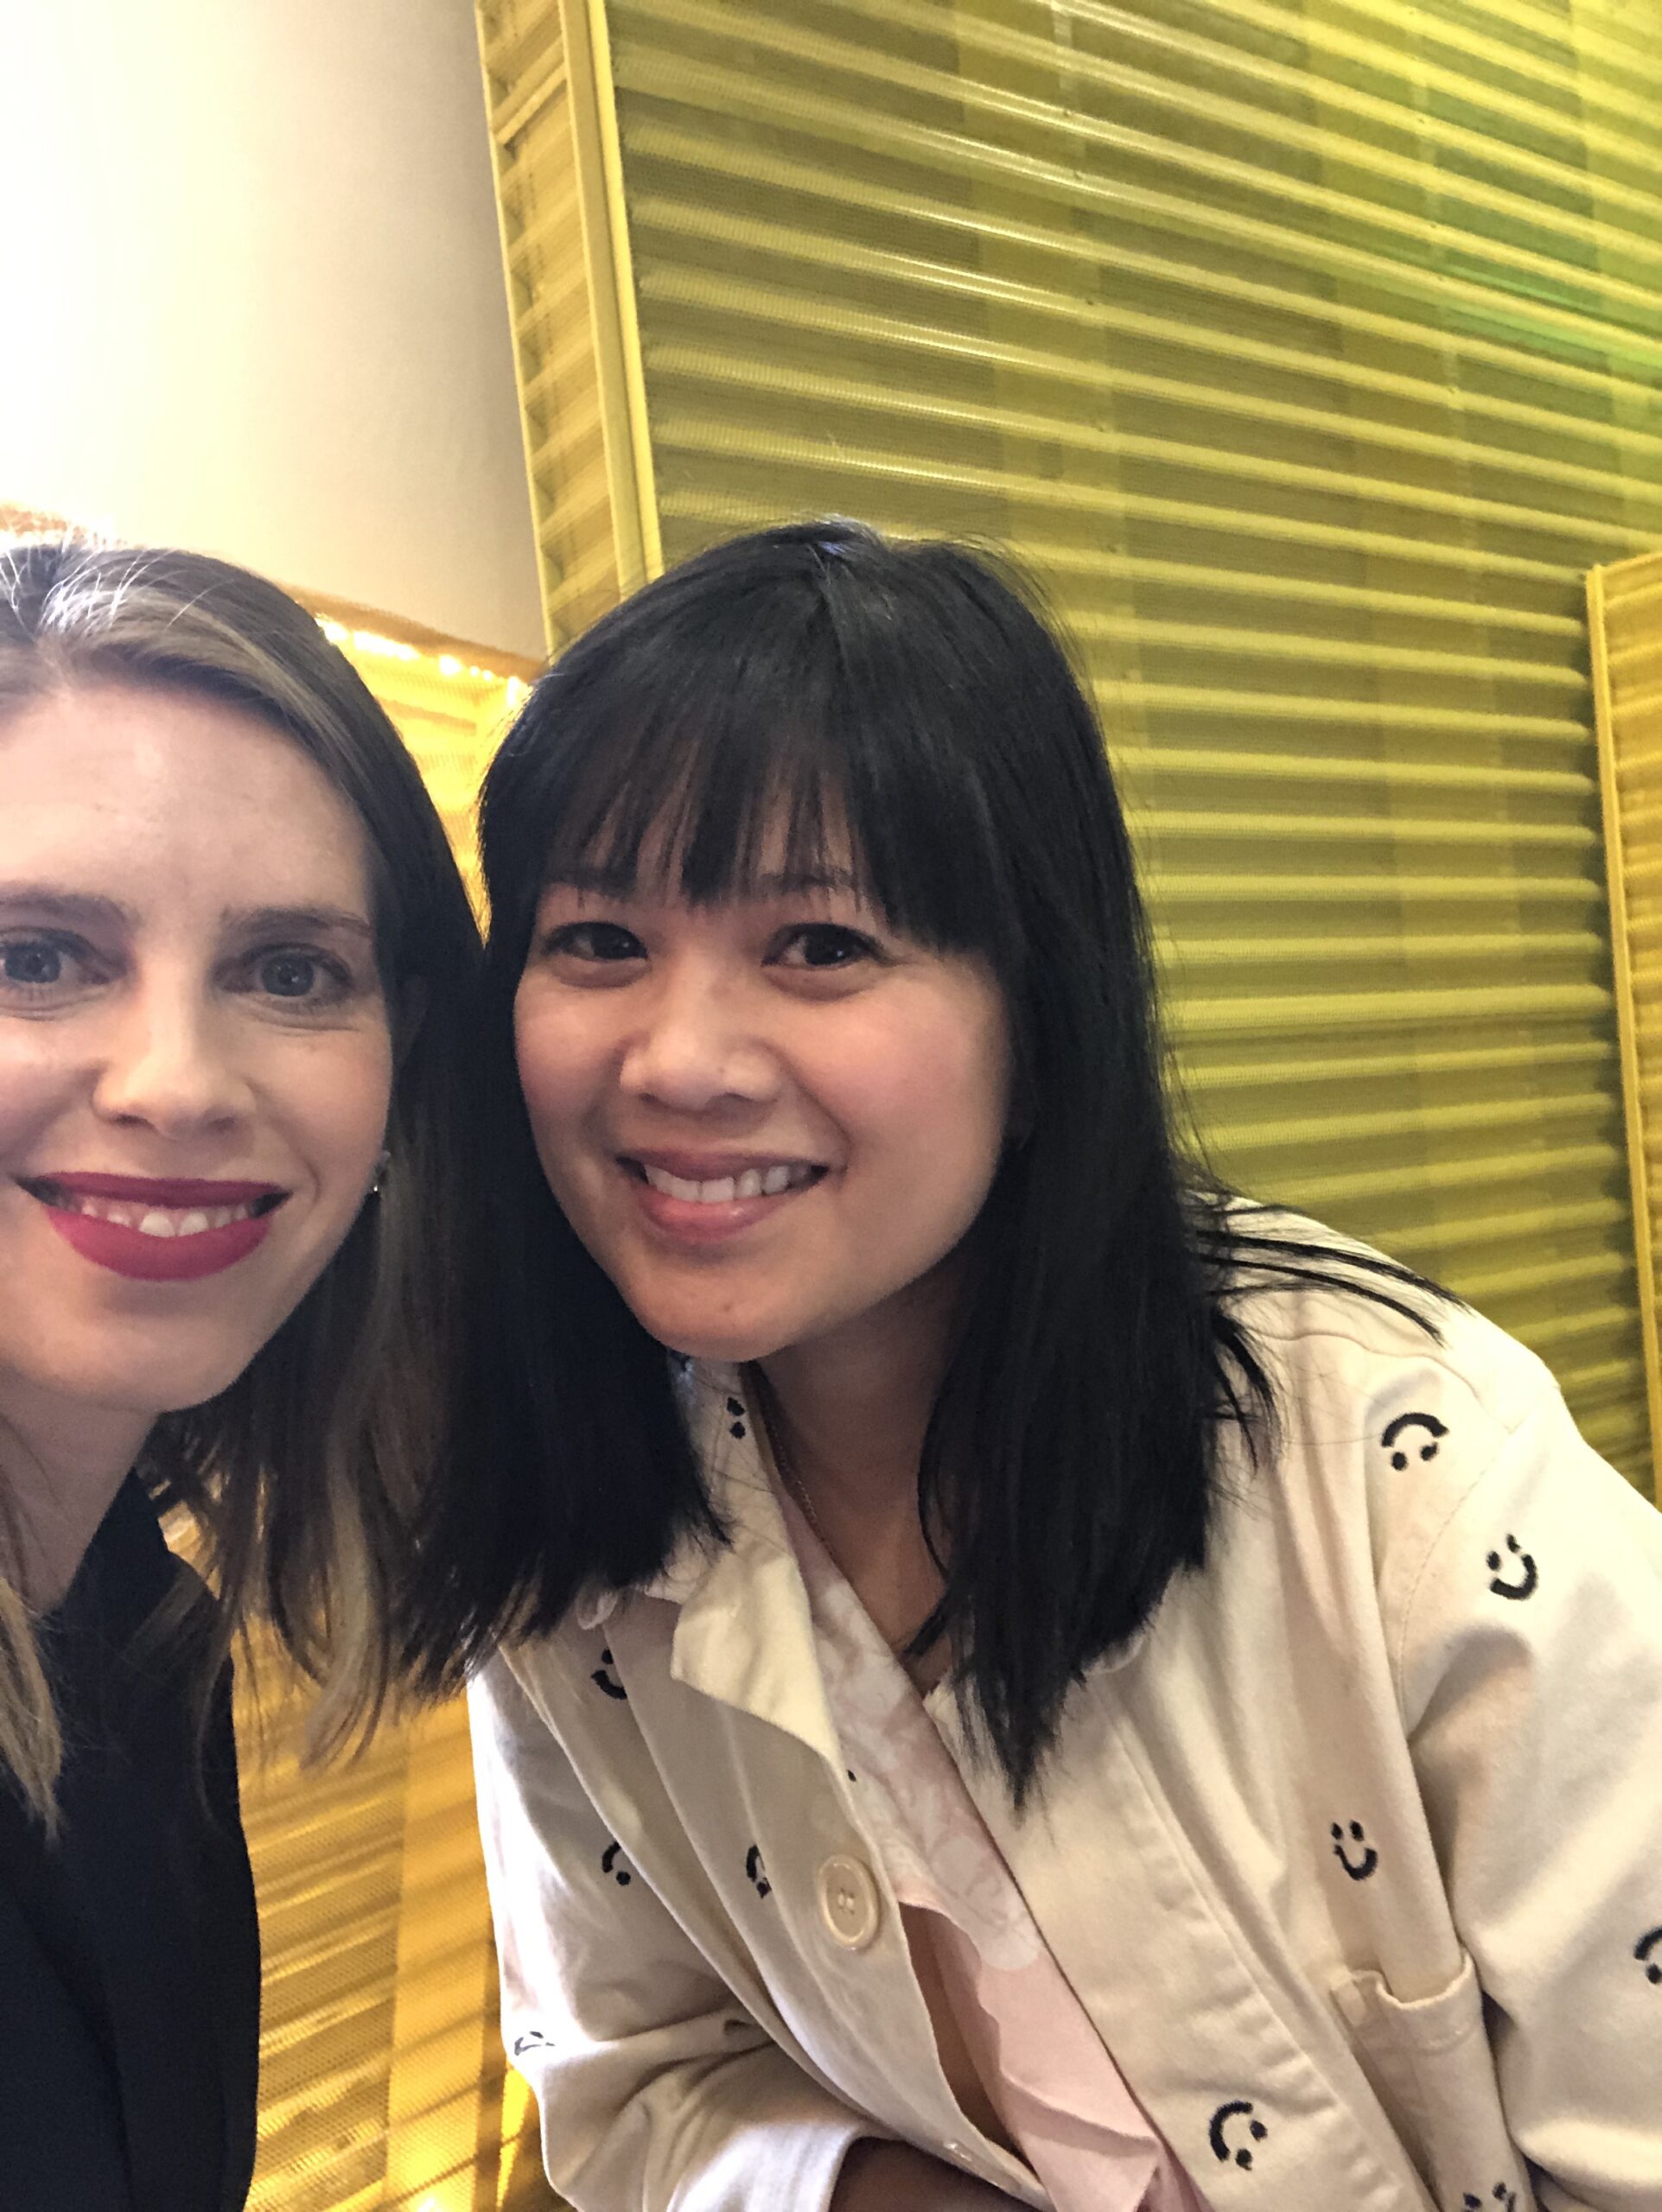 I loved chatting with Joy (@ohjoy) she was so kind and gave the best business tips!